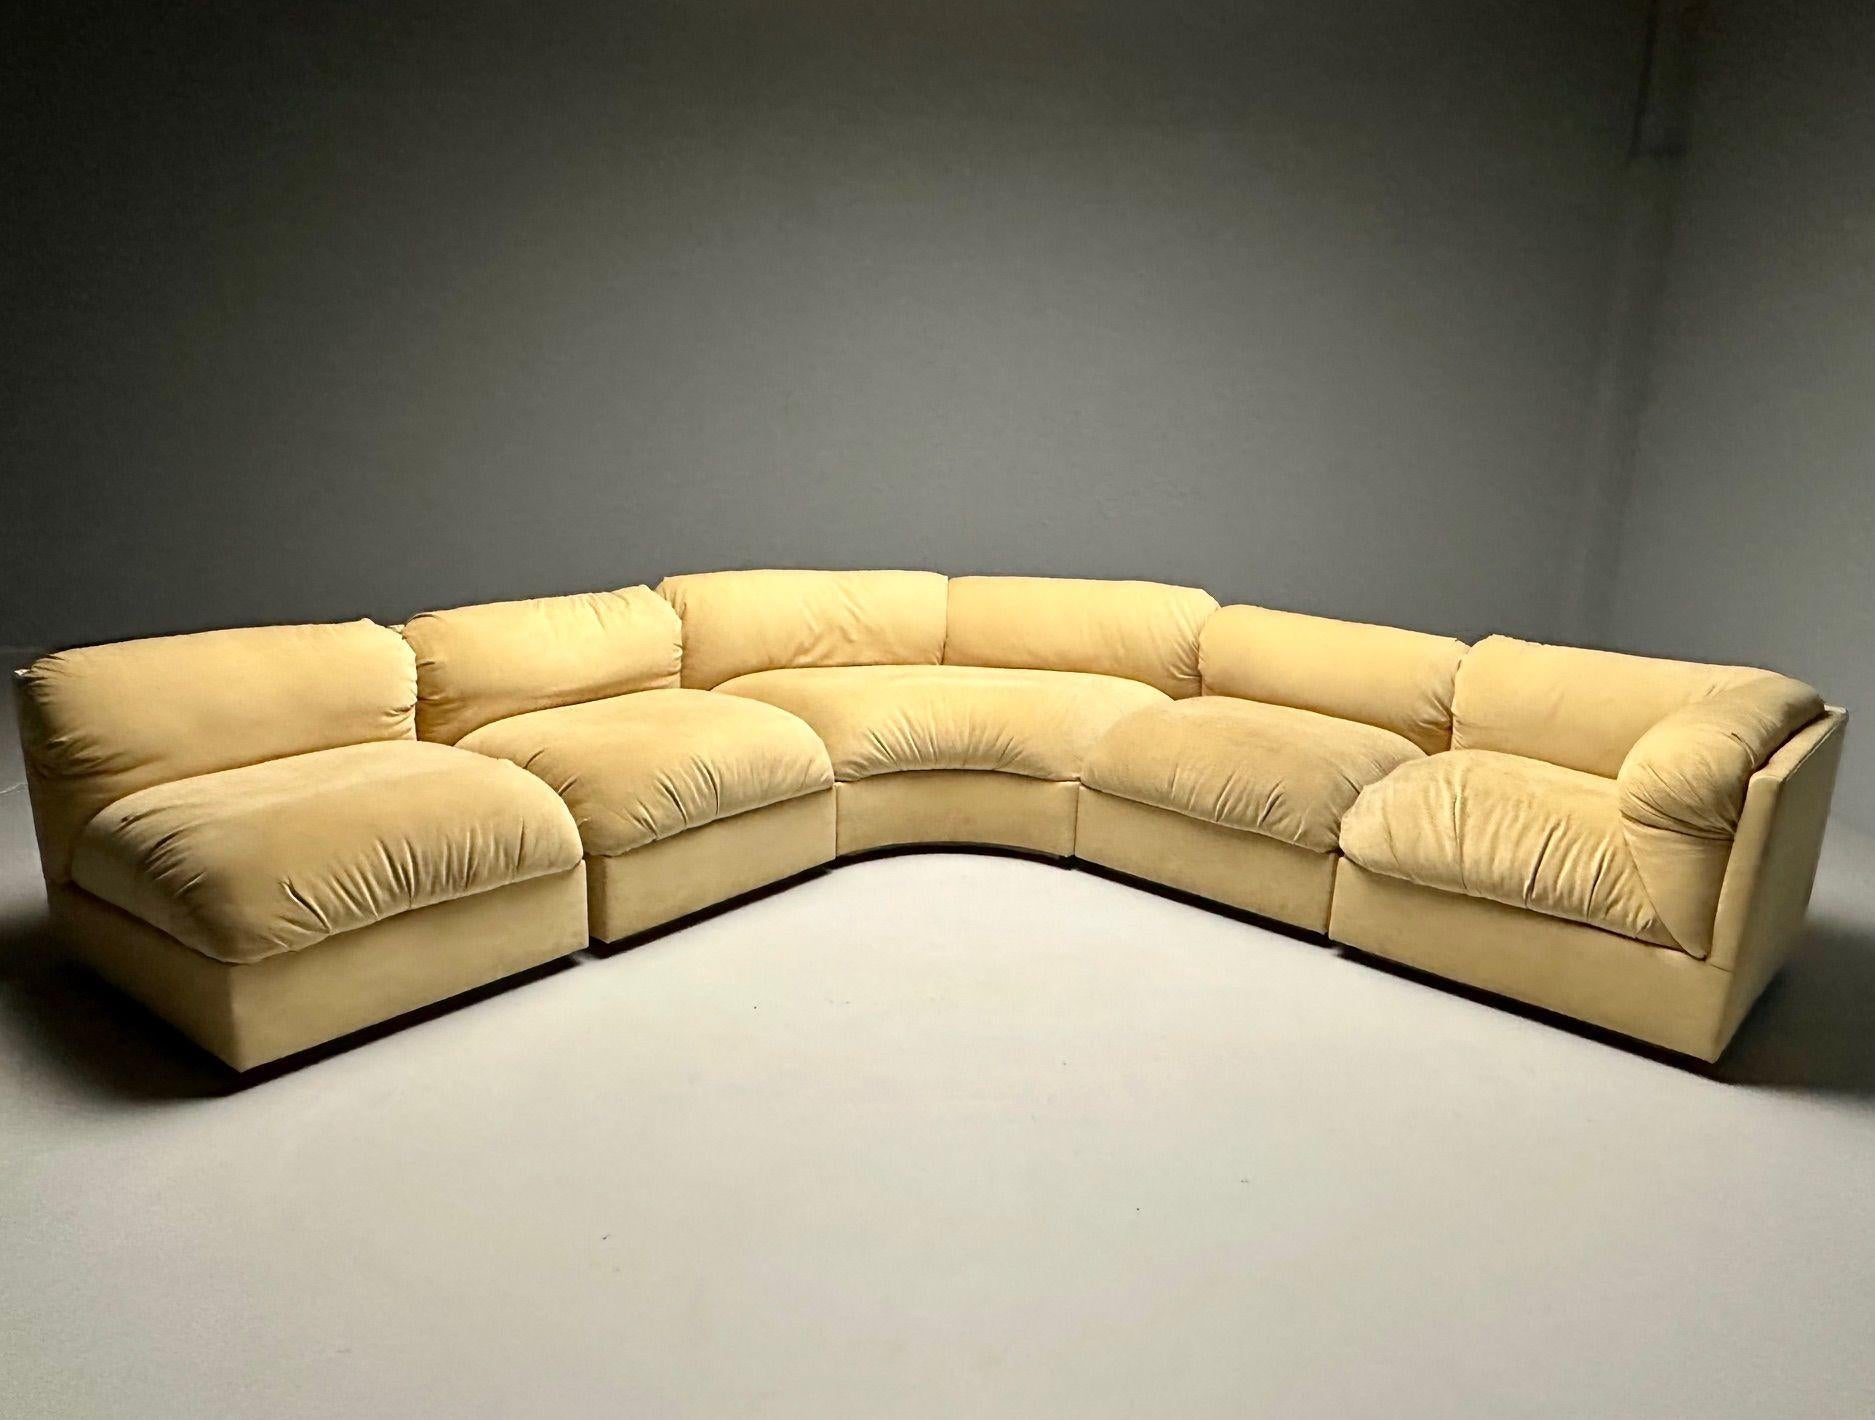 Erwin-Lambeth, Mid-Century Modern, Large Modular Sectional Sofa, Re-upholstery For Sale 11